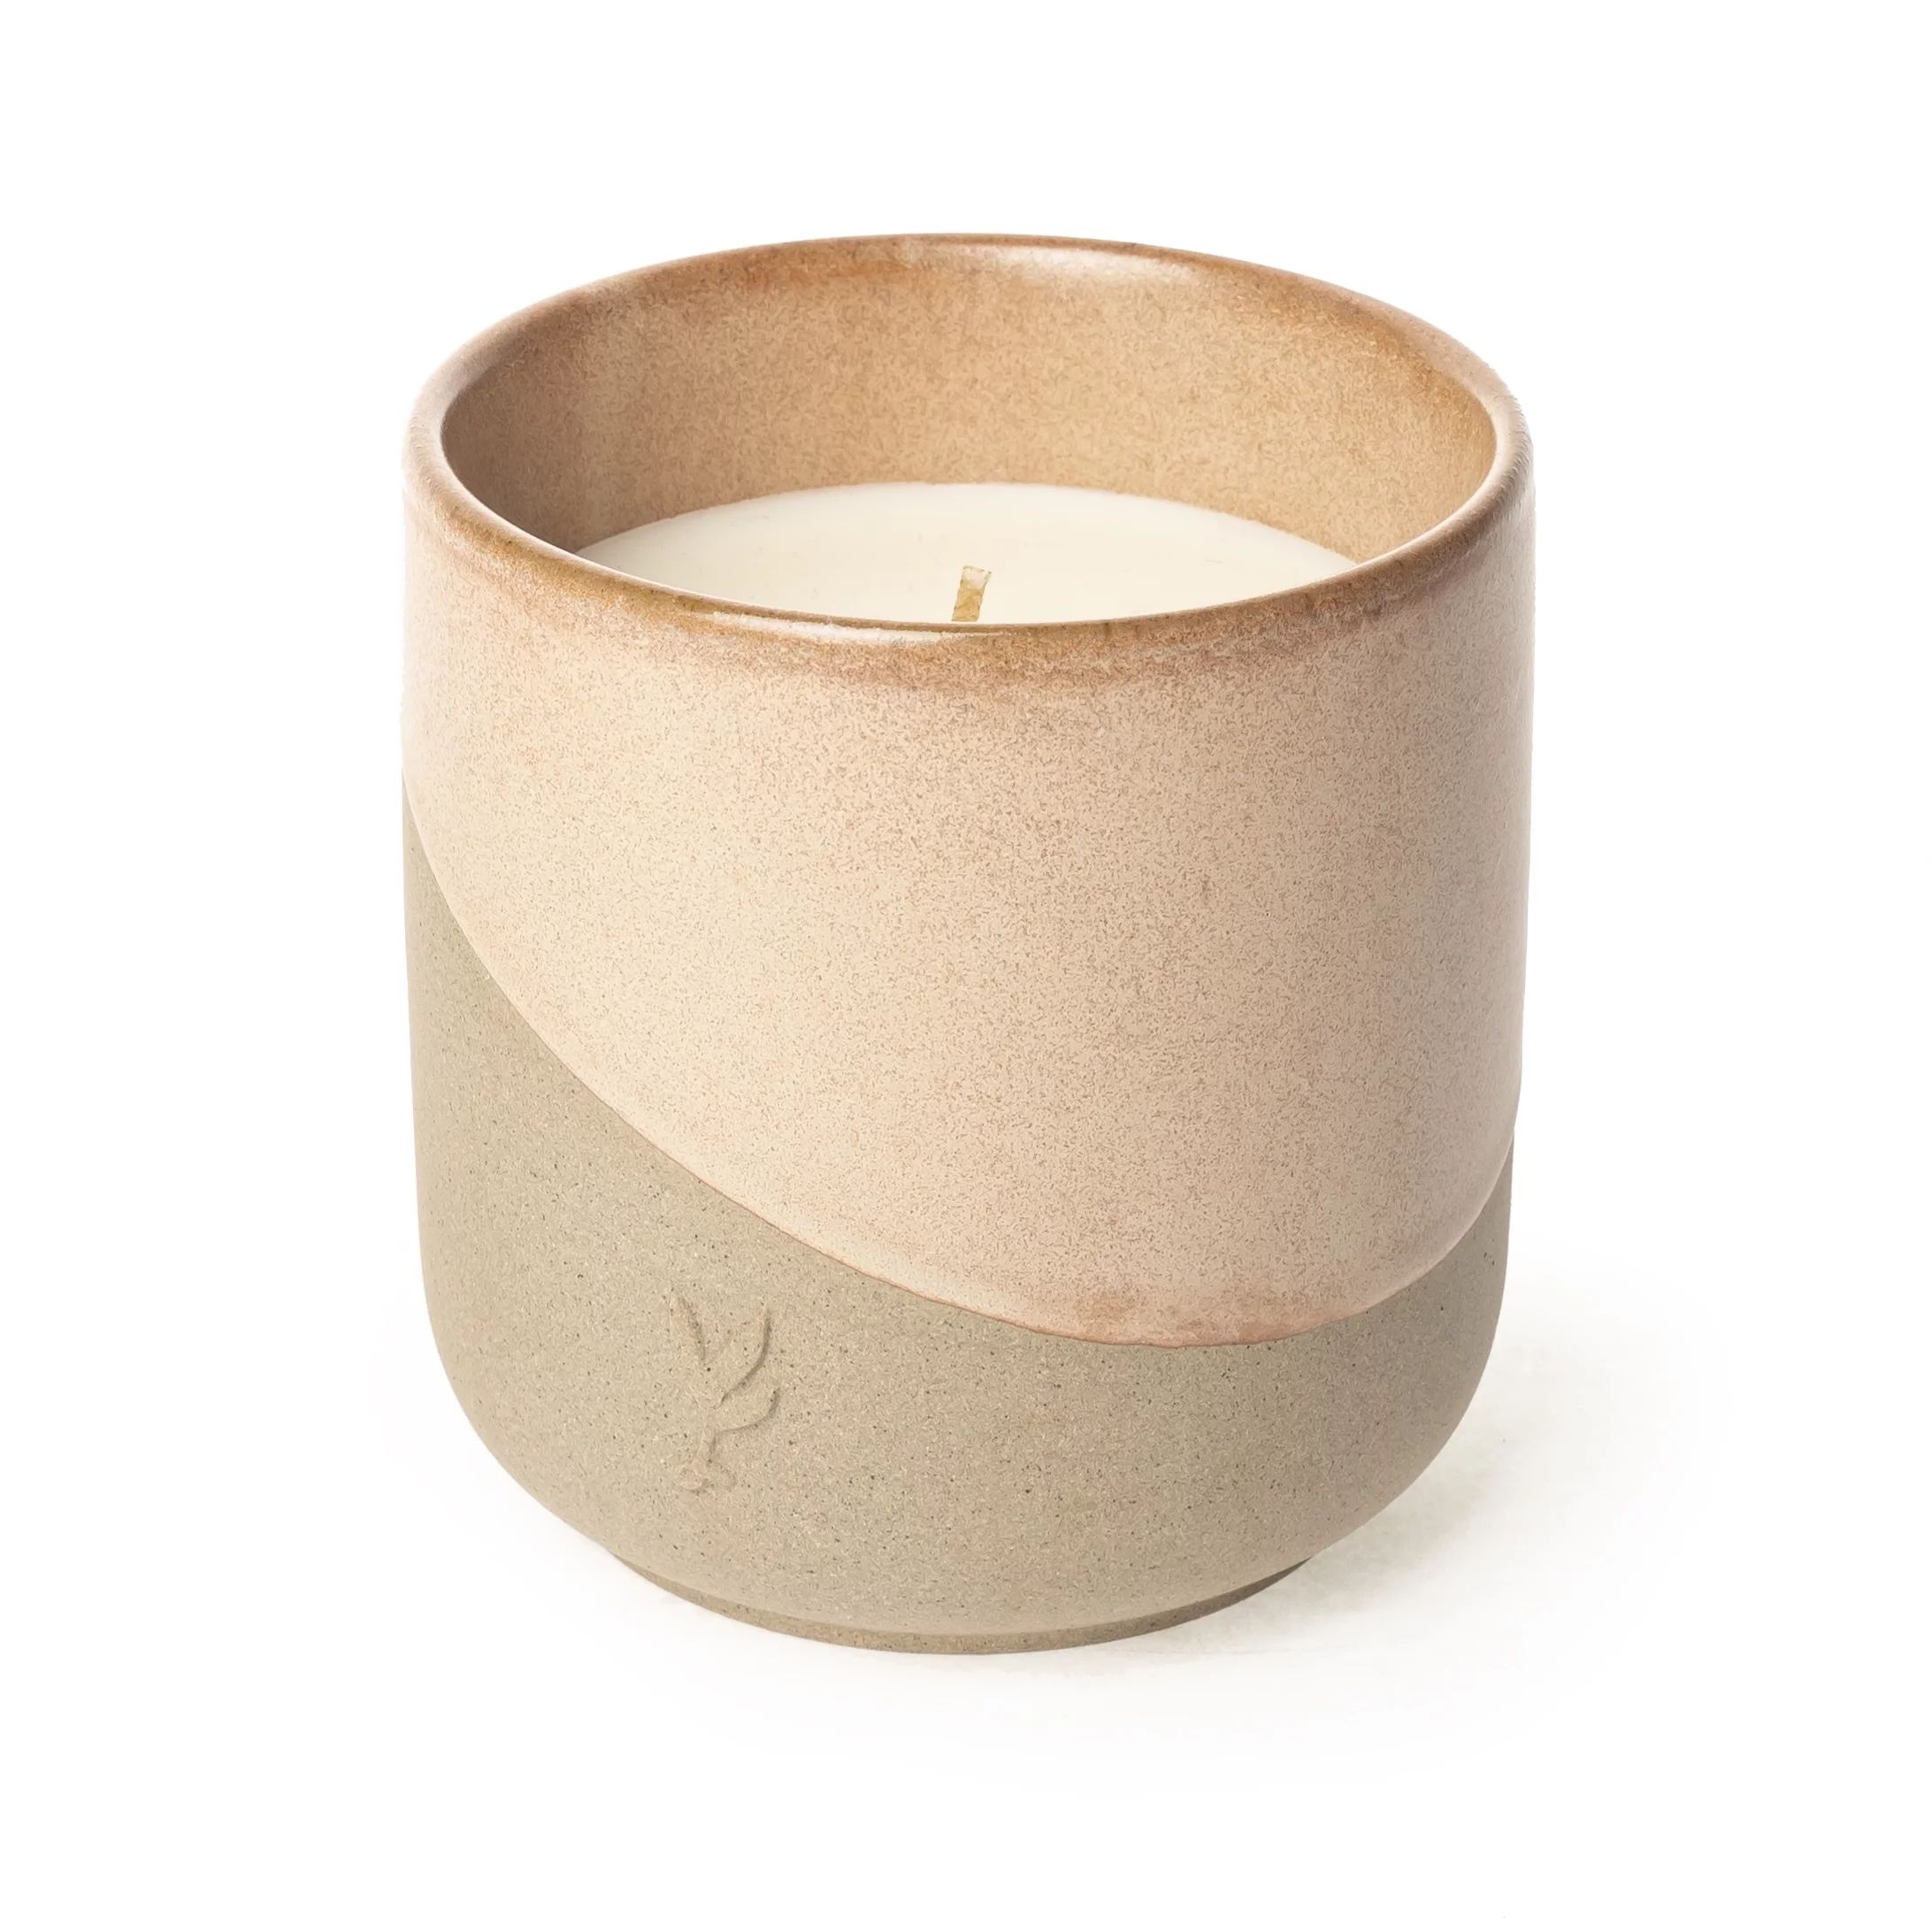 Better Homes & Gardens Maple Scented 13.9oz Ceramic Dip Single-Wick Candle by Dave & Jenny Marrs | Walmart (US)